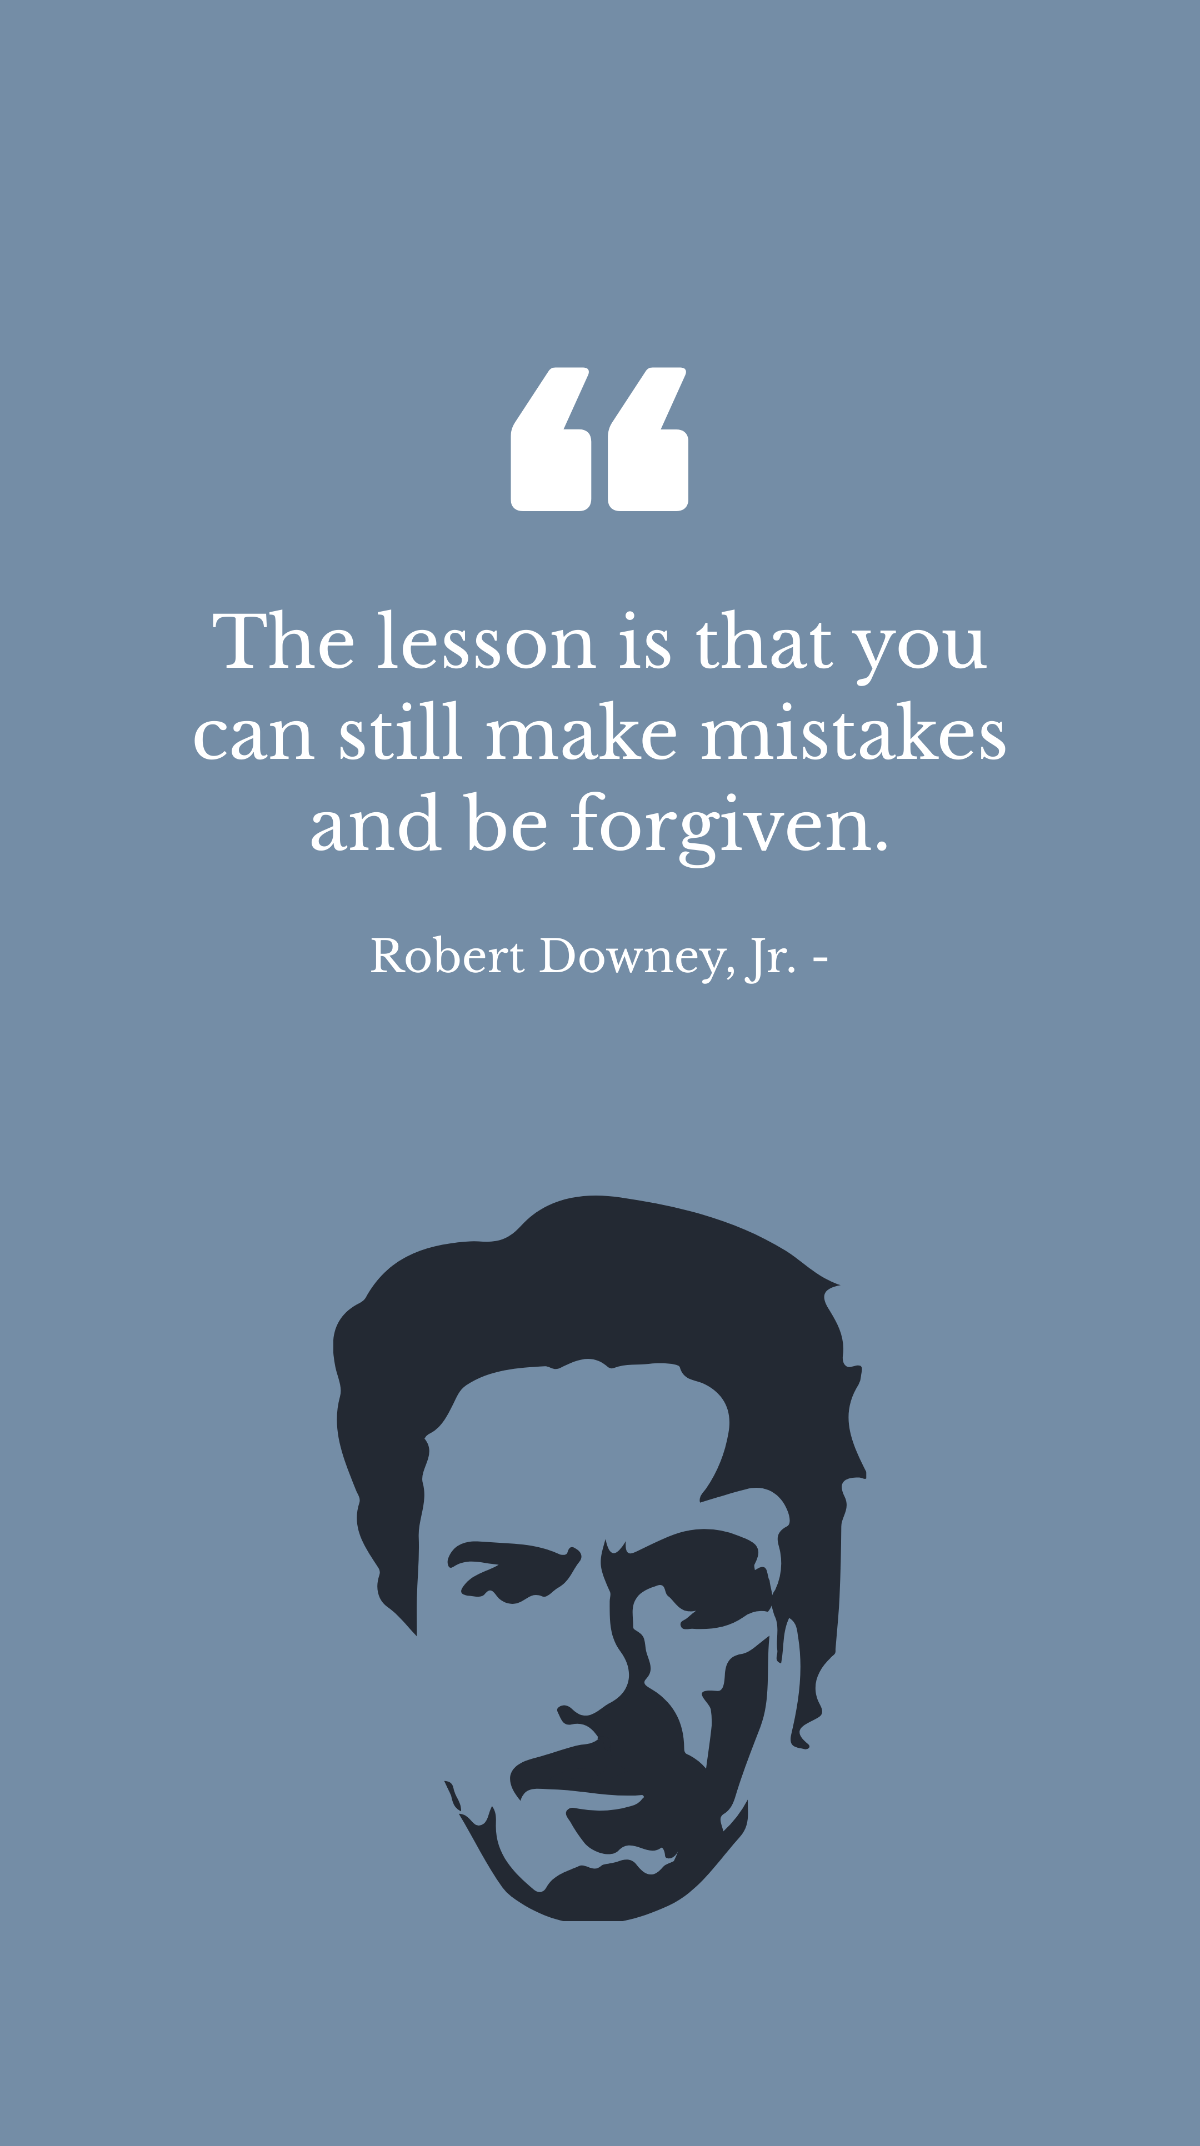 Robert Downey, Jr. - The lesson is that you can still make mistakes and be forgiven. Template